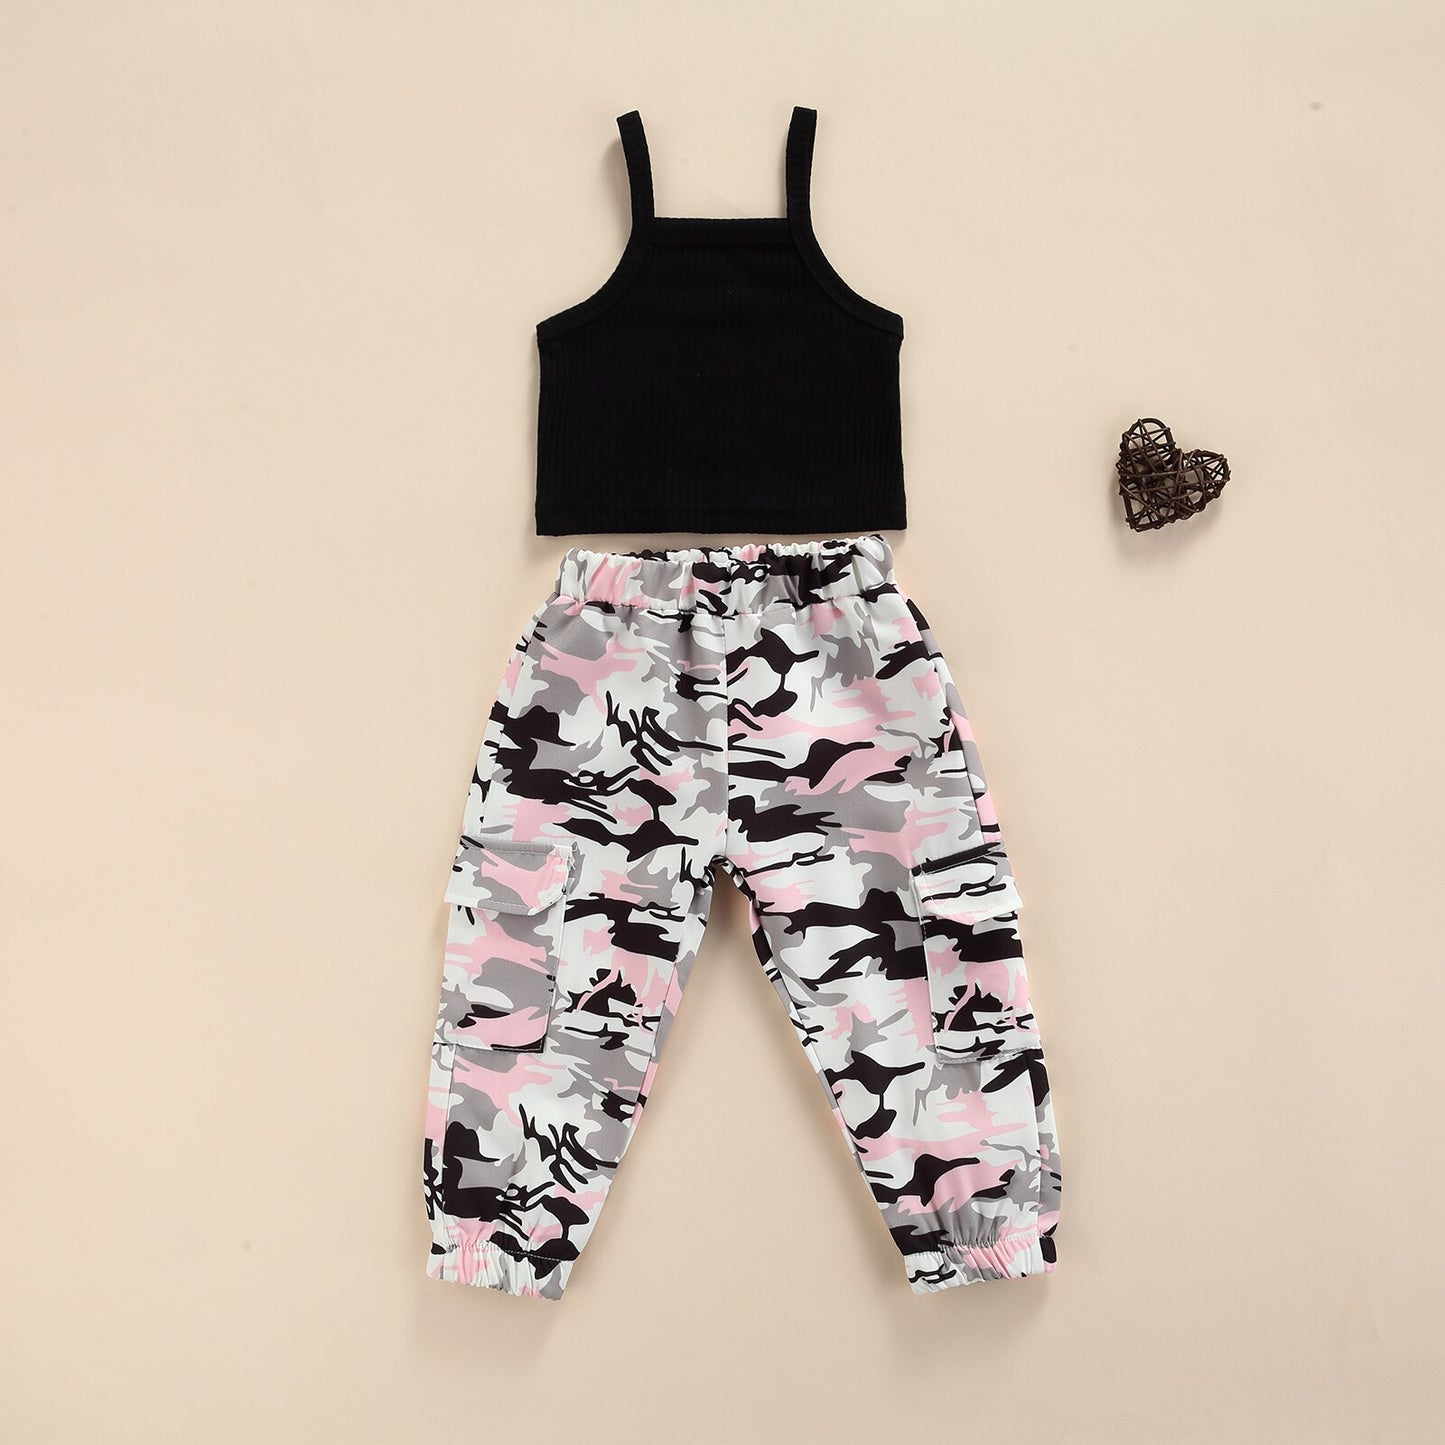 FOCUSNORM 1-7Y Summer Fashion Girls Clothes Sets 2pcs Sleeveless Solid Vest Tops Camouflage Printed Long Pants